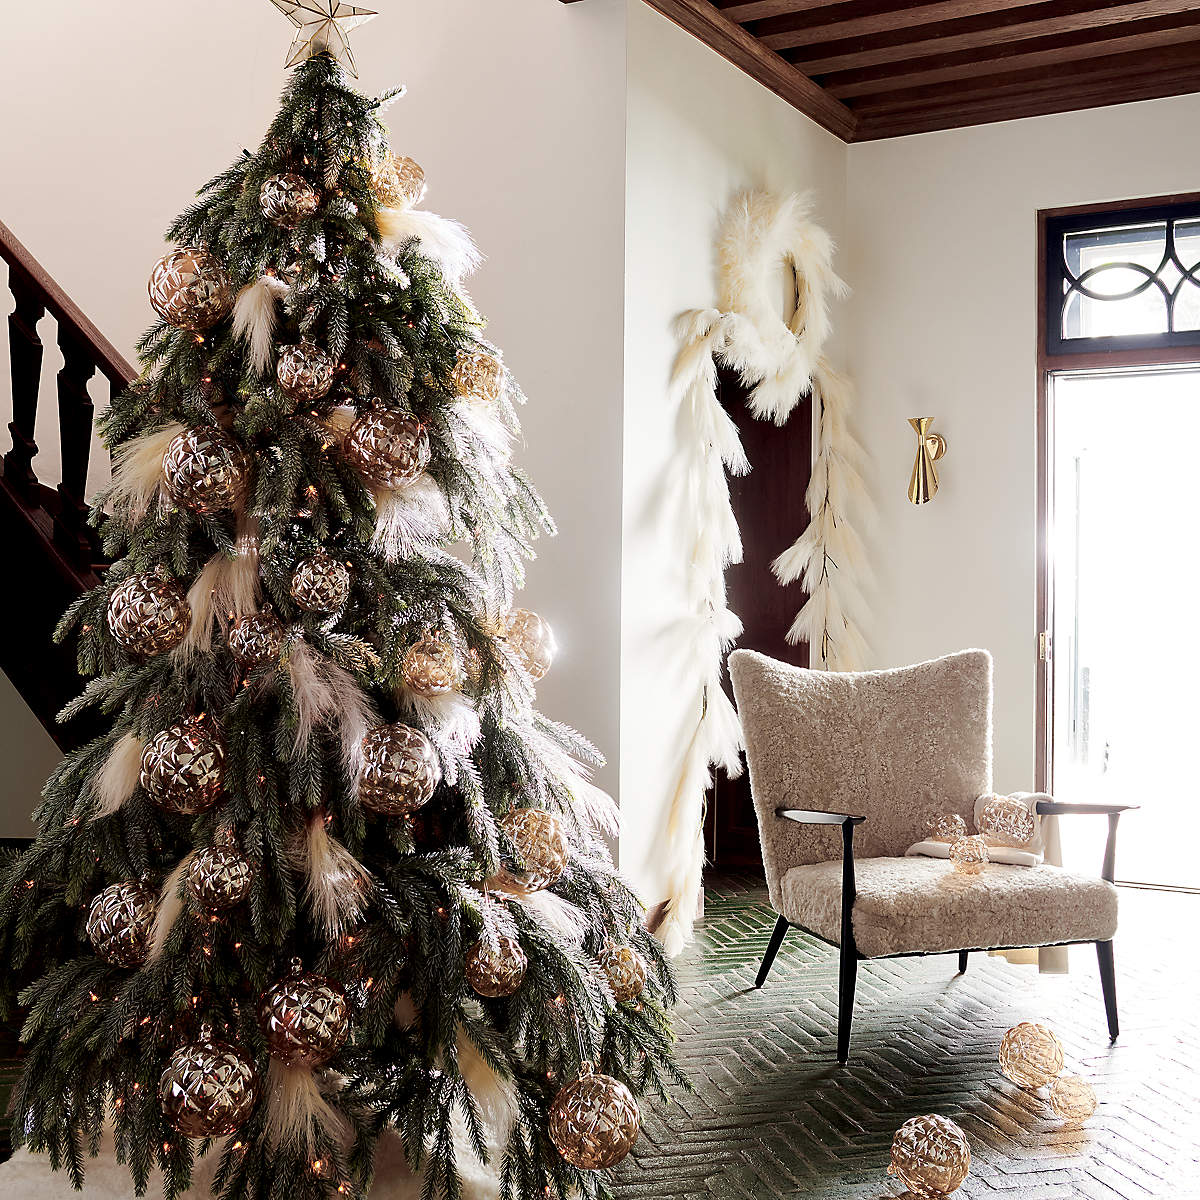 Get inspired by boho christmas decor ideas for a bohemian holiday